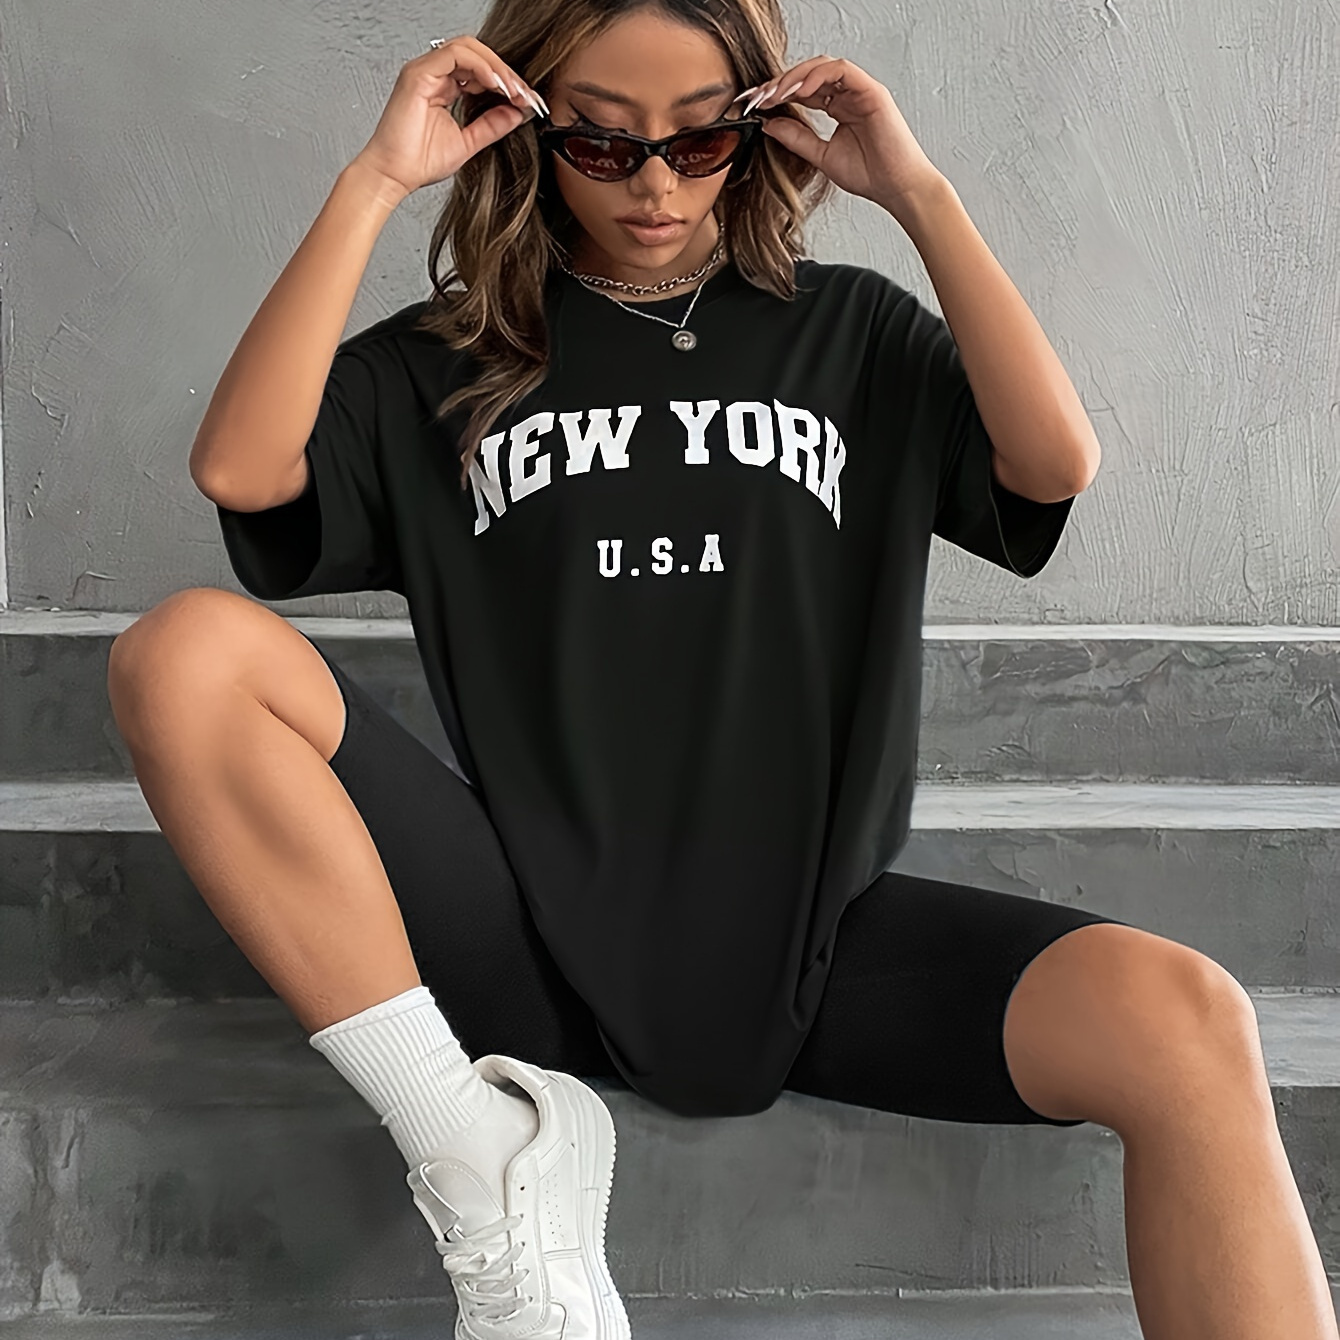 

New York Print Two-piece Set, Casual Short Sleeve T-shirt & Skinny Shorts Outfits, Women's Clothing